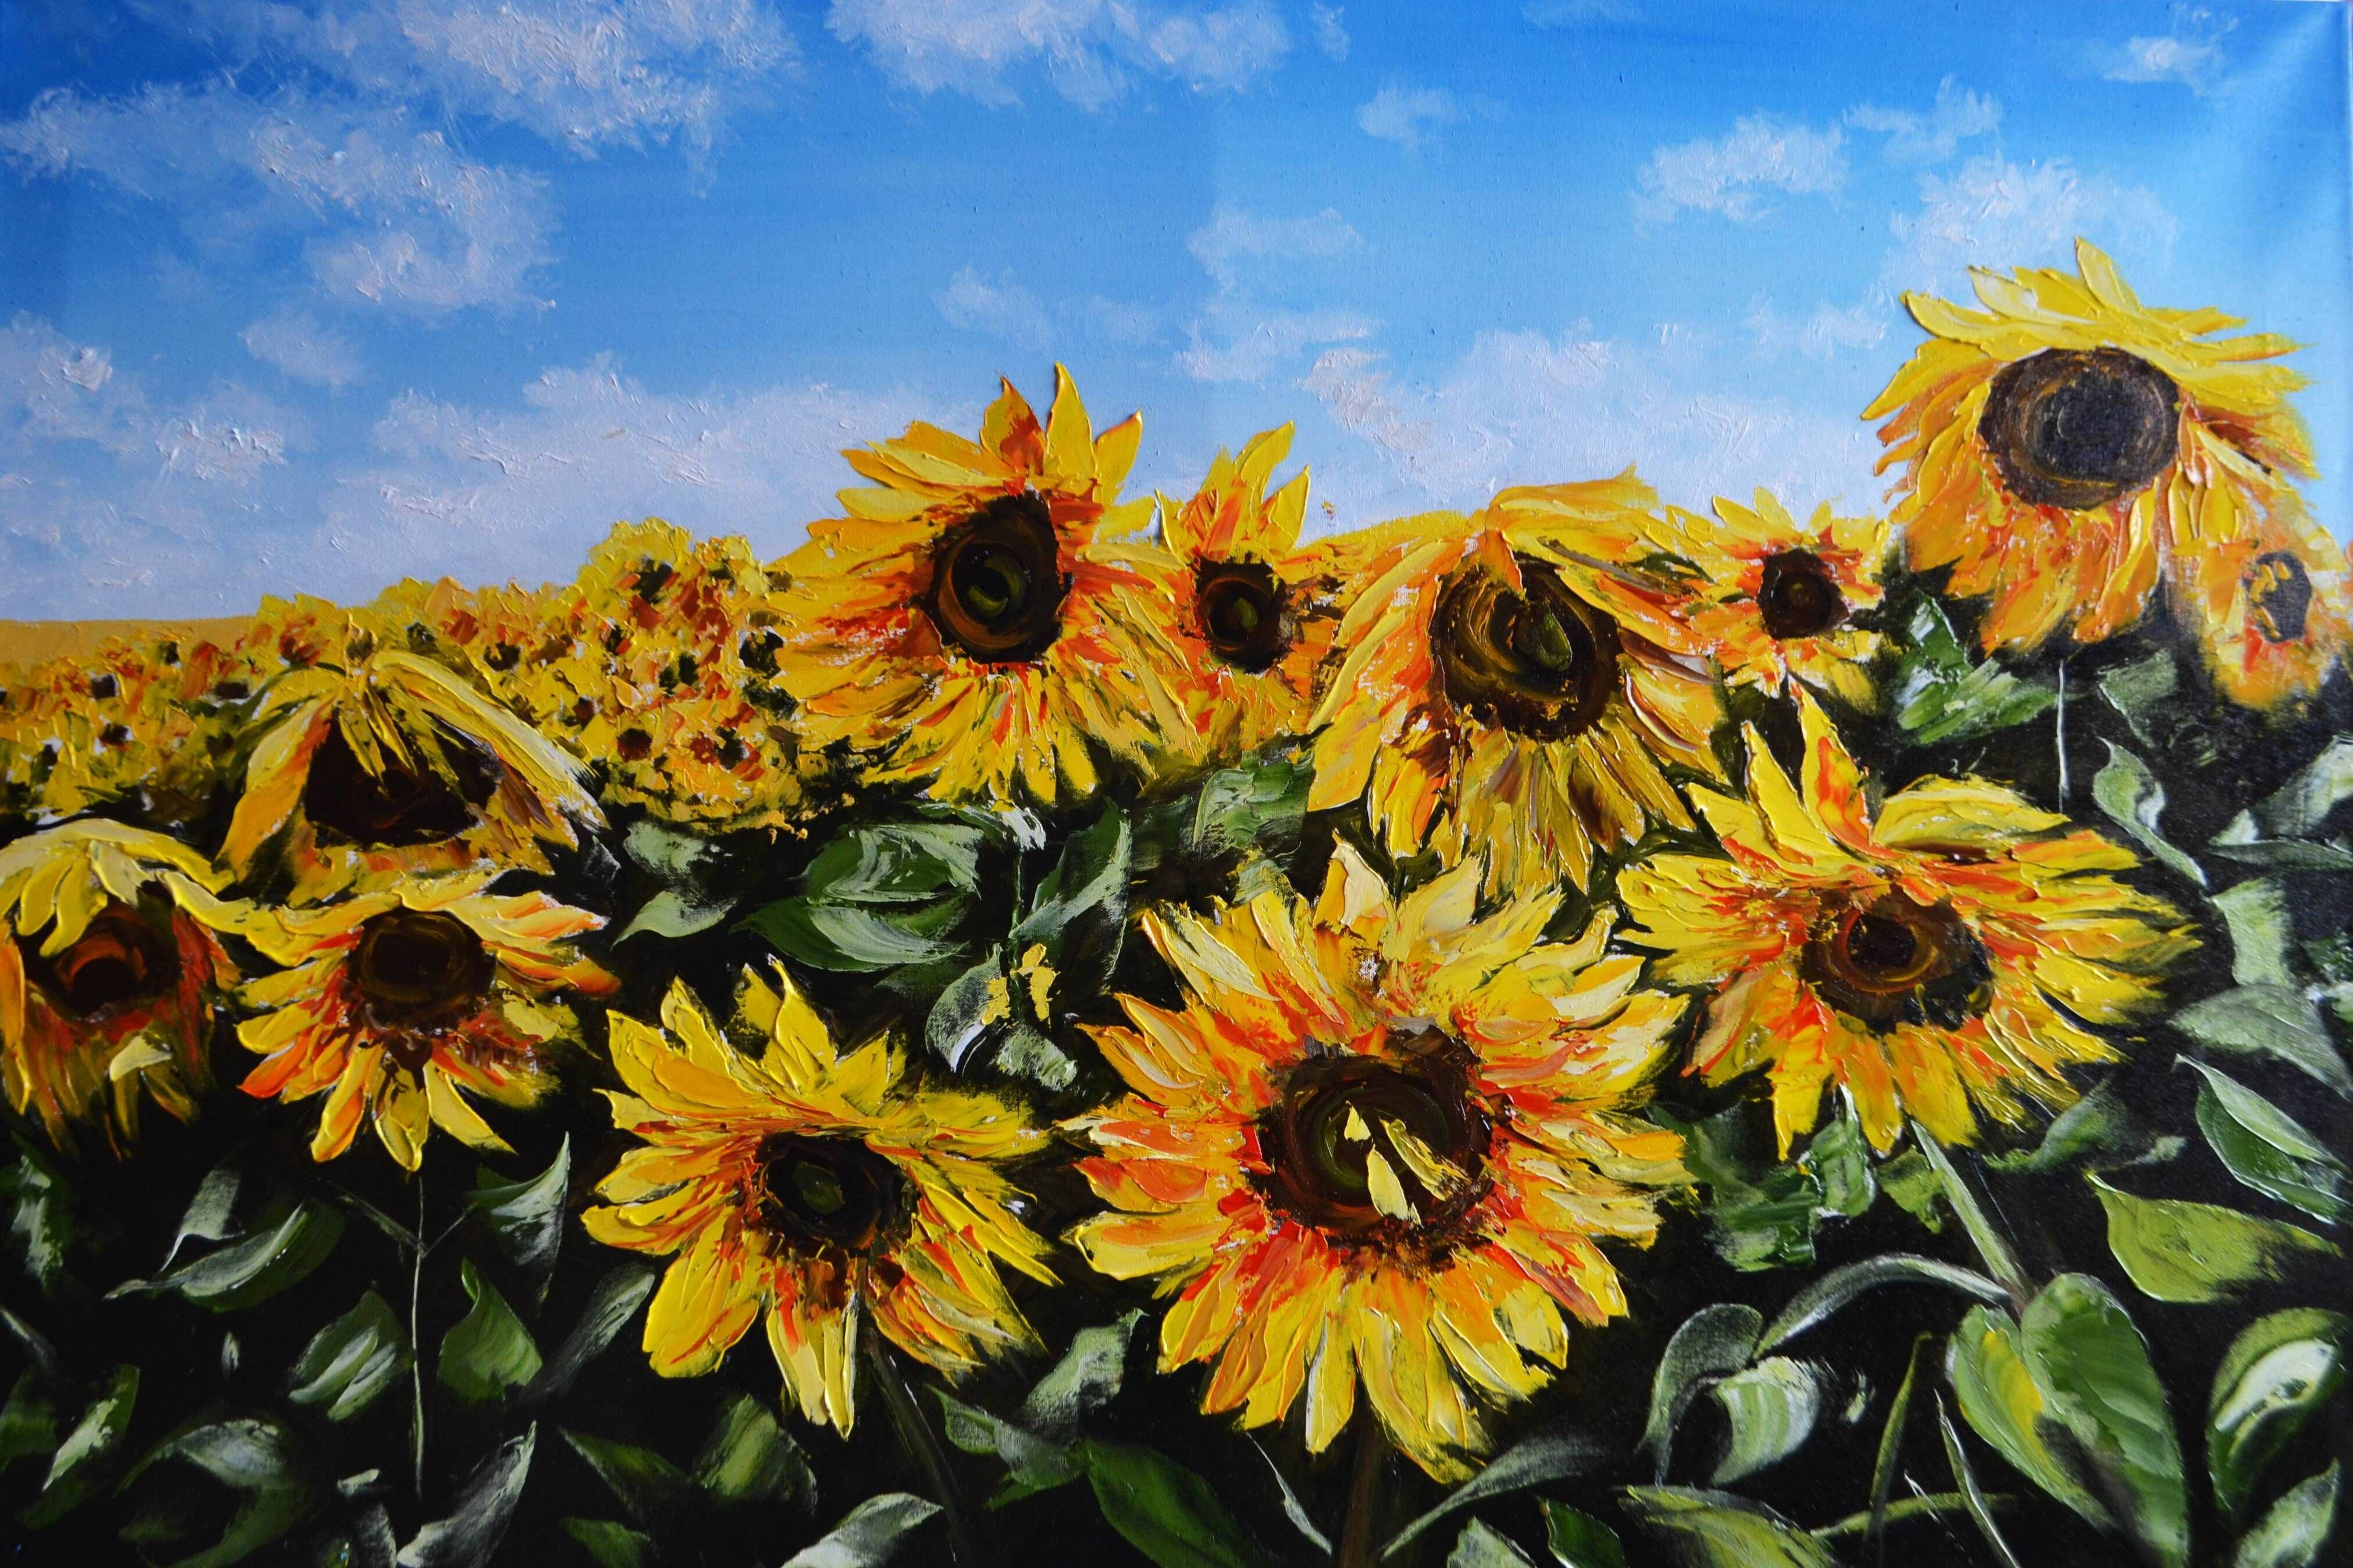 Field of sunflowers under the blue sky. Ukrainian symbol of peace, generosity and happiness.    Oil on a gallery canvas, signed and dated.    Certificate of Authenticity is included.  Gift wrapped.    Ready to hang. The artwork has a hanging system